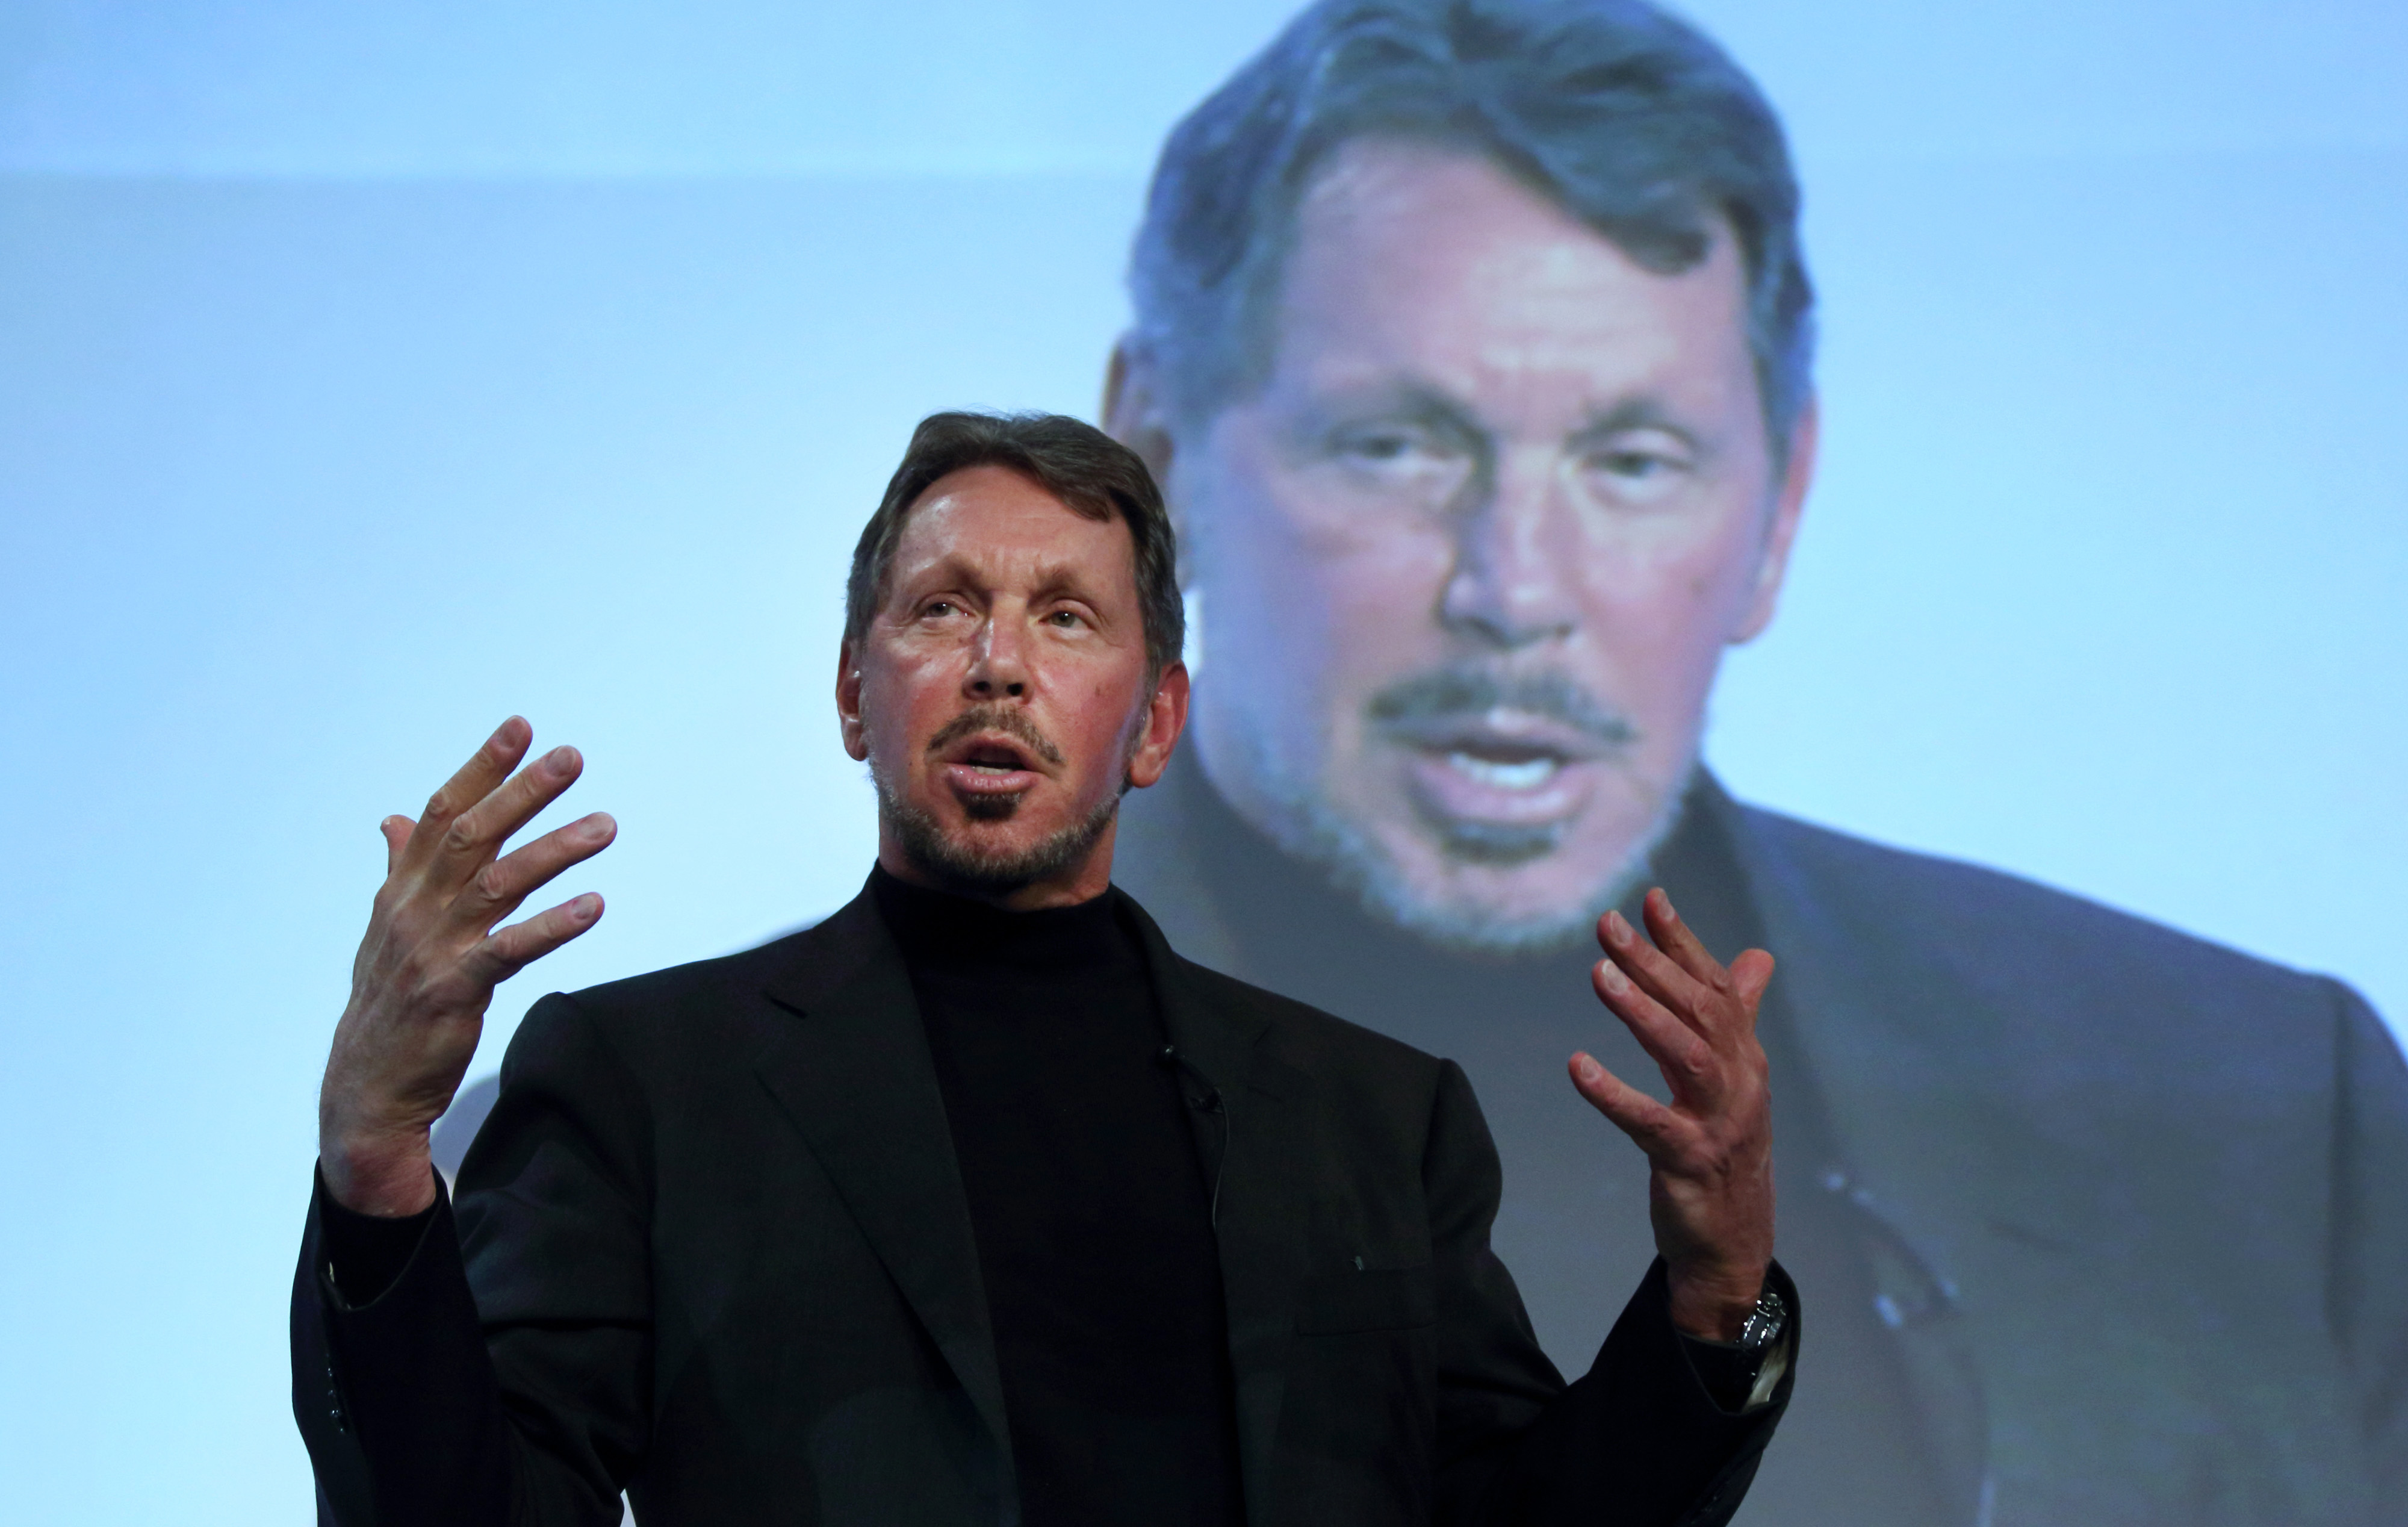 Larry Ellison stunned the tech world in September by announcing he's stepping down as CEO of Oracle, the enterprise software company he co-founded in 1977. Since Oracle doesn't sell products to the public like Apple or Microsoft, Ellison's a little less-known outside Silicon Valley: But he's a hugely important figure, having heavily influenced Steve Jobs and a host of other tech leaders.